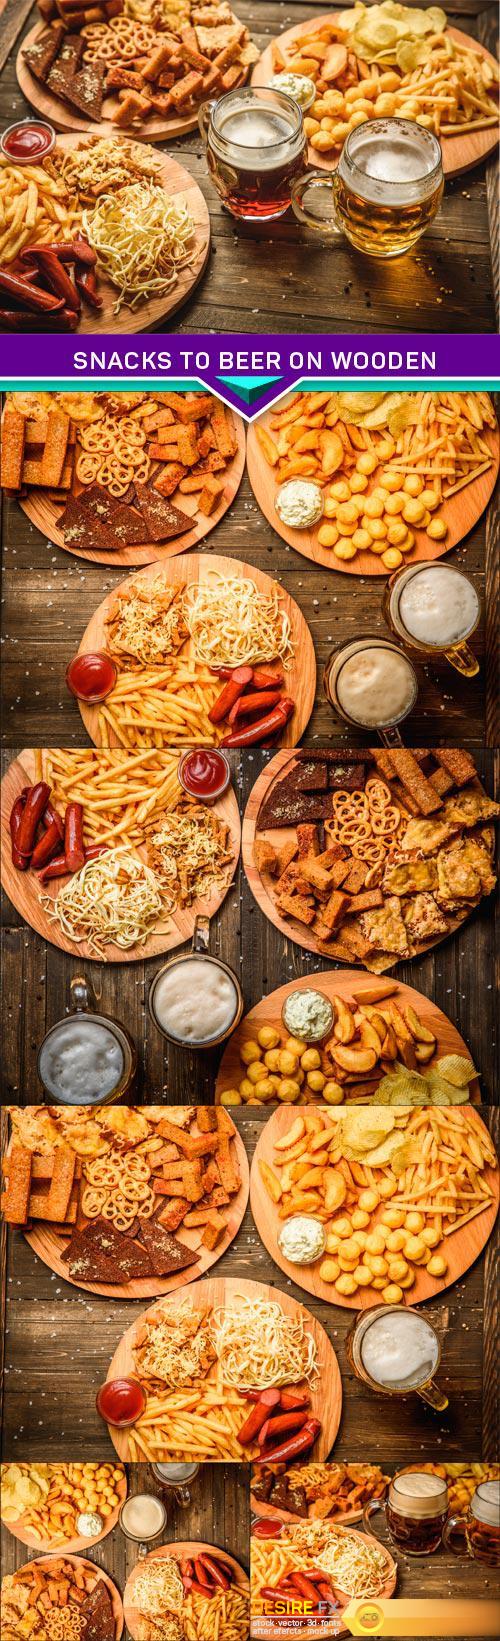 Snacks to beer on wooden background top view 6X JPEG